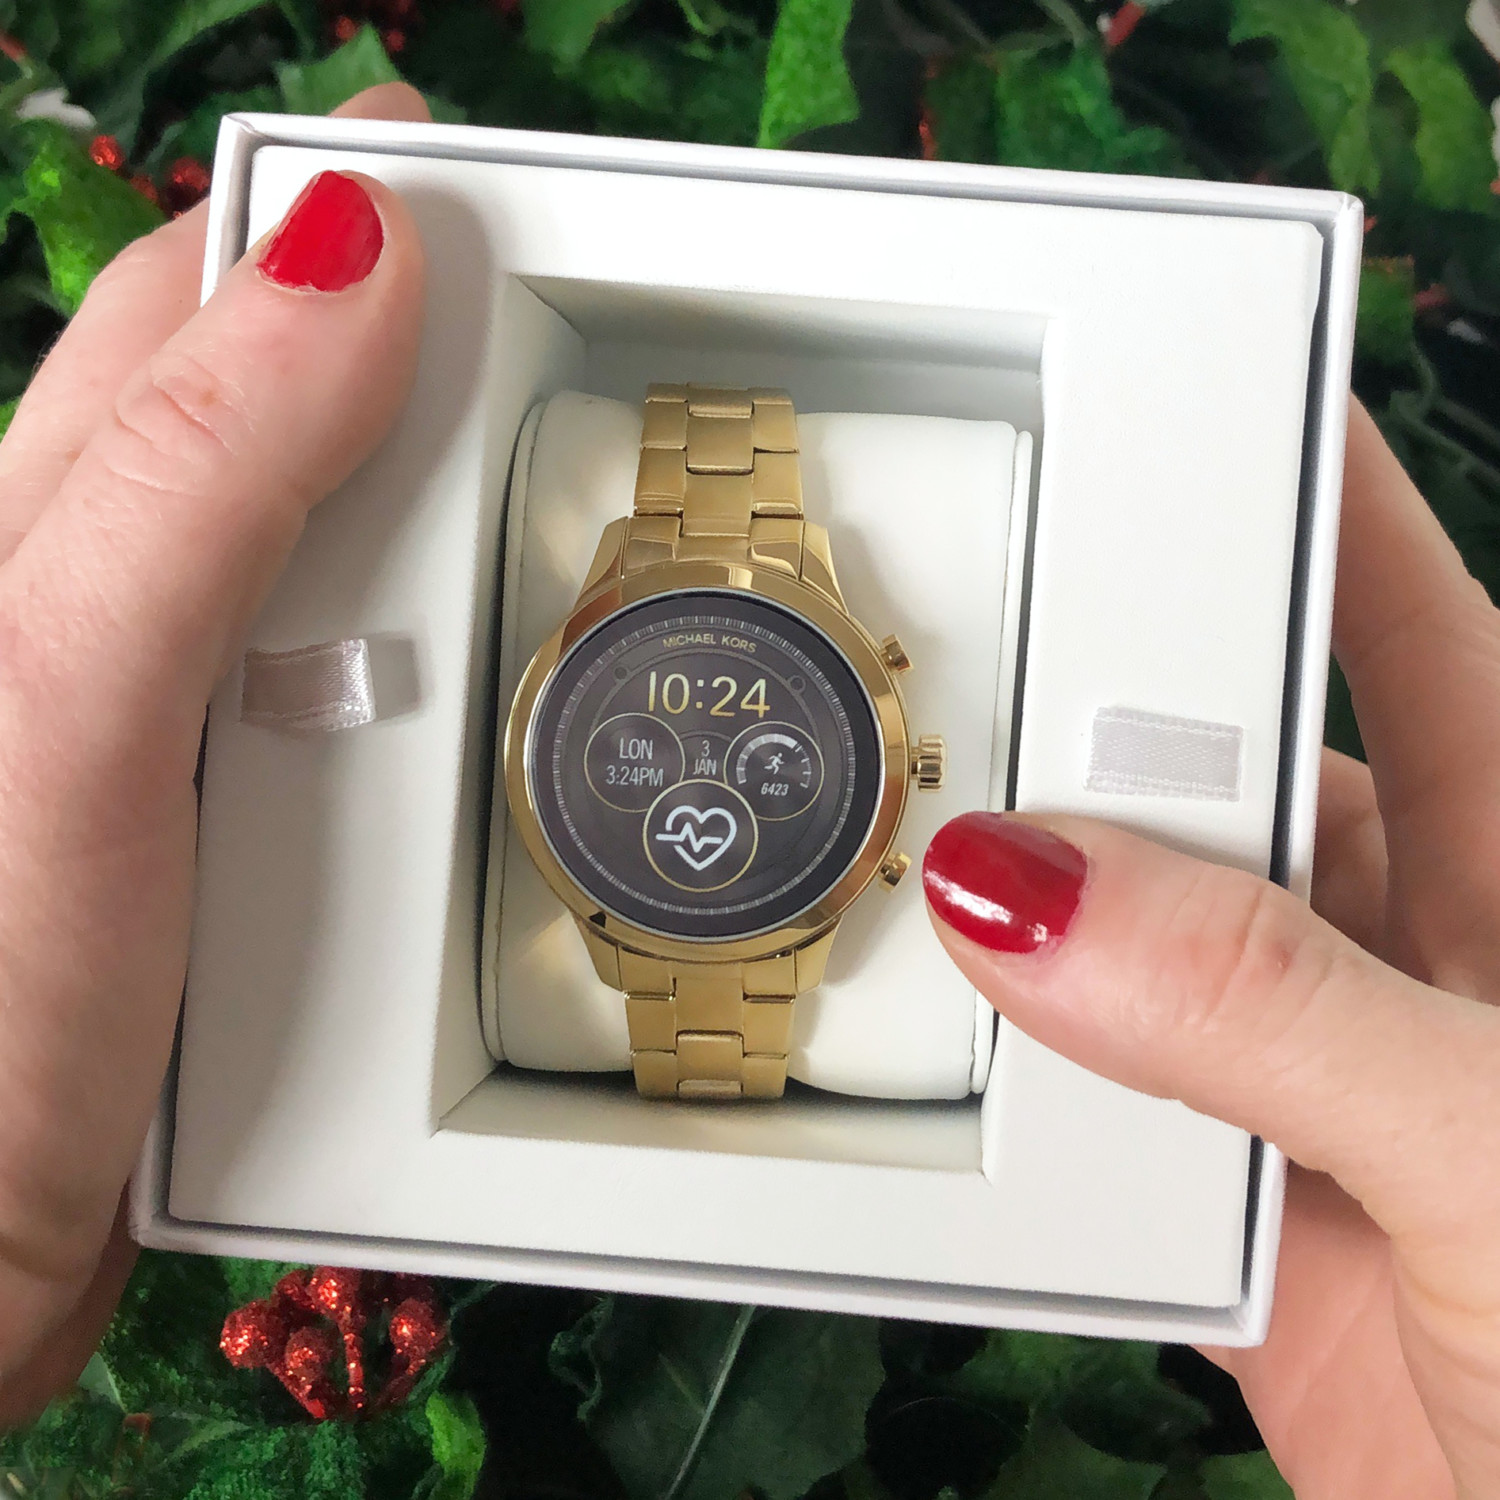 De Dios aceptable saldar The Michael Kors Access Runway Smartwatch for iOS and Android - Life She Has